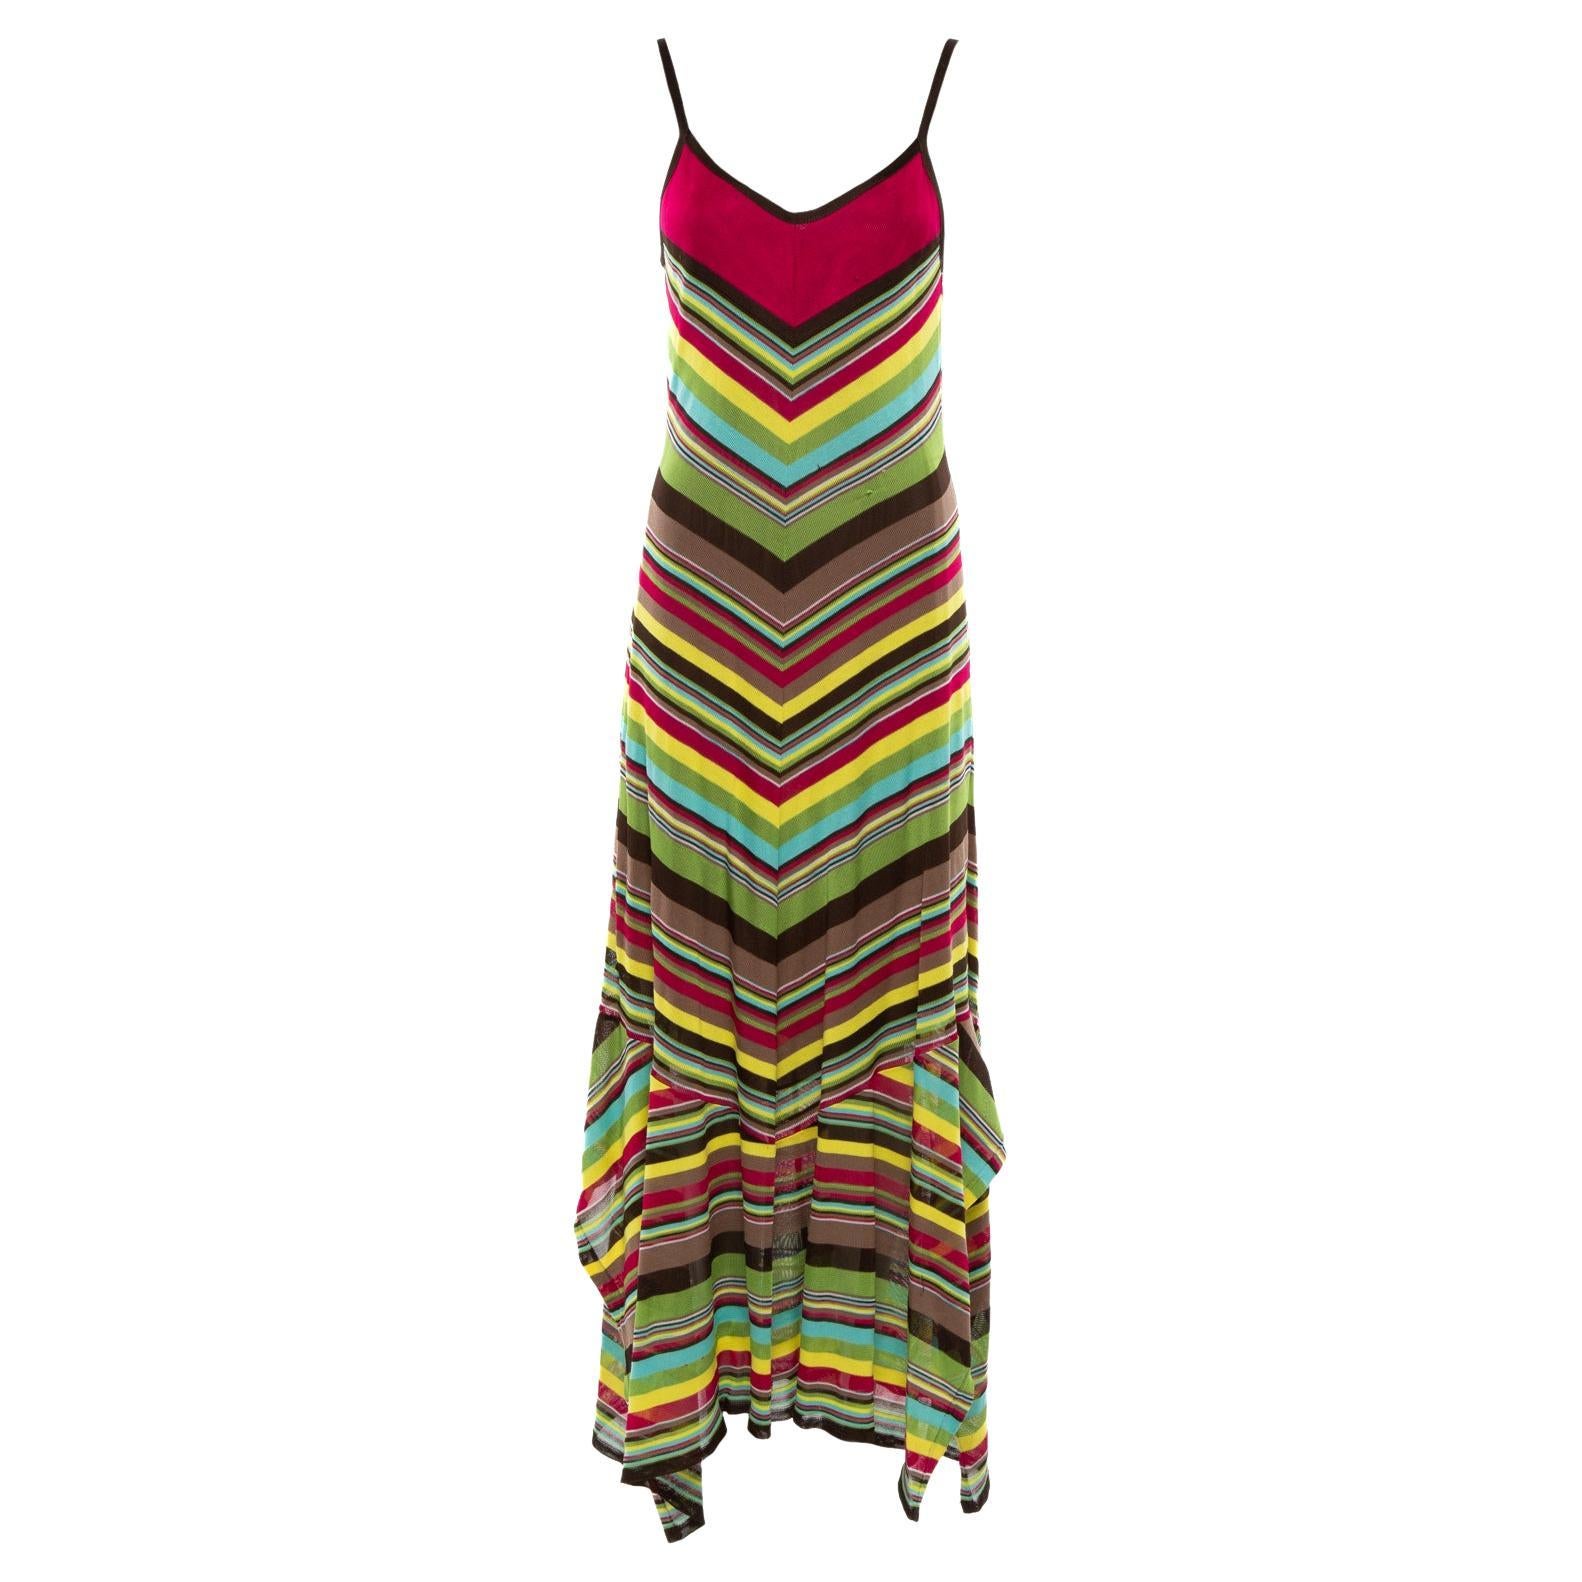 M Missoni Marled Bicolor Mesh Insert Cut Out Detail Striped Sleeveless ...